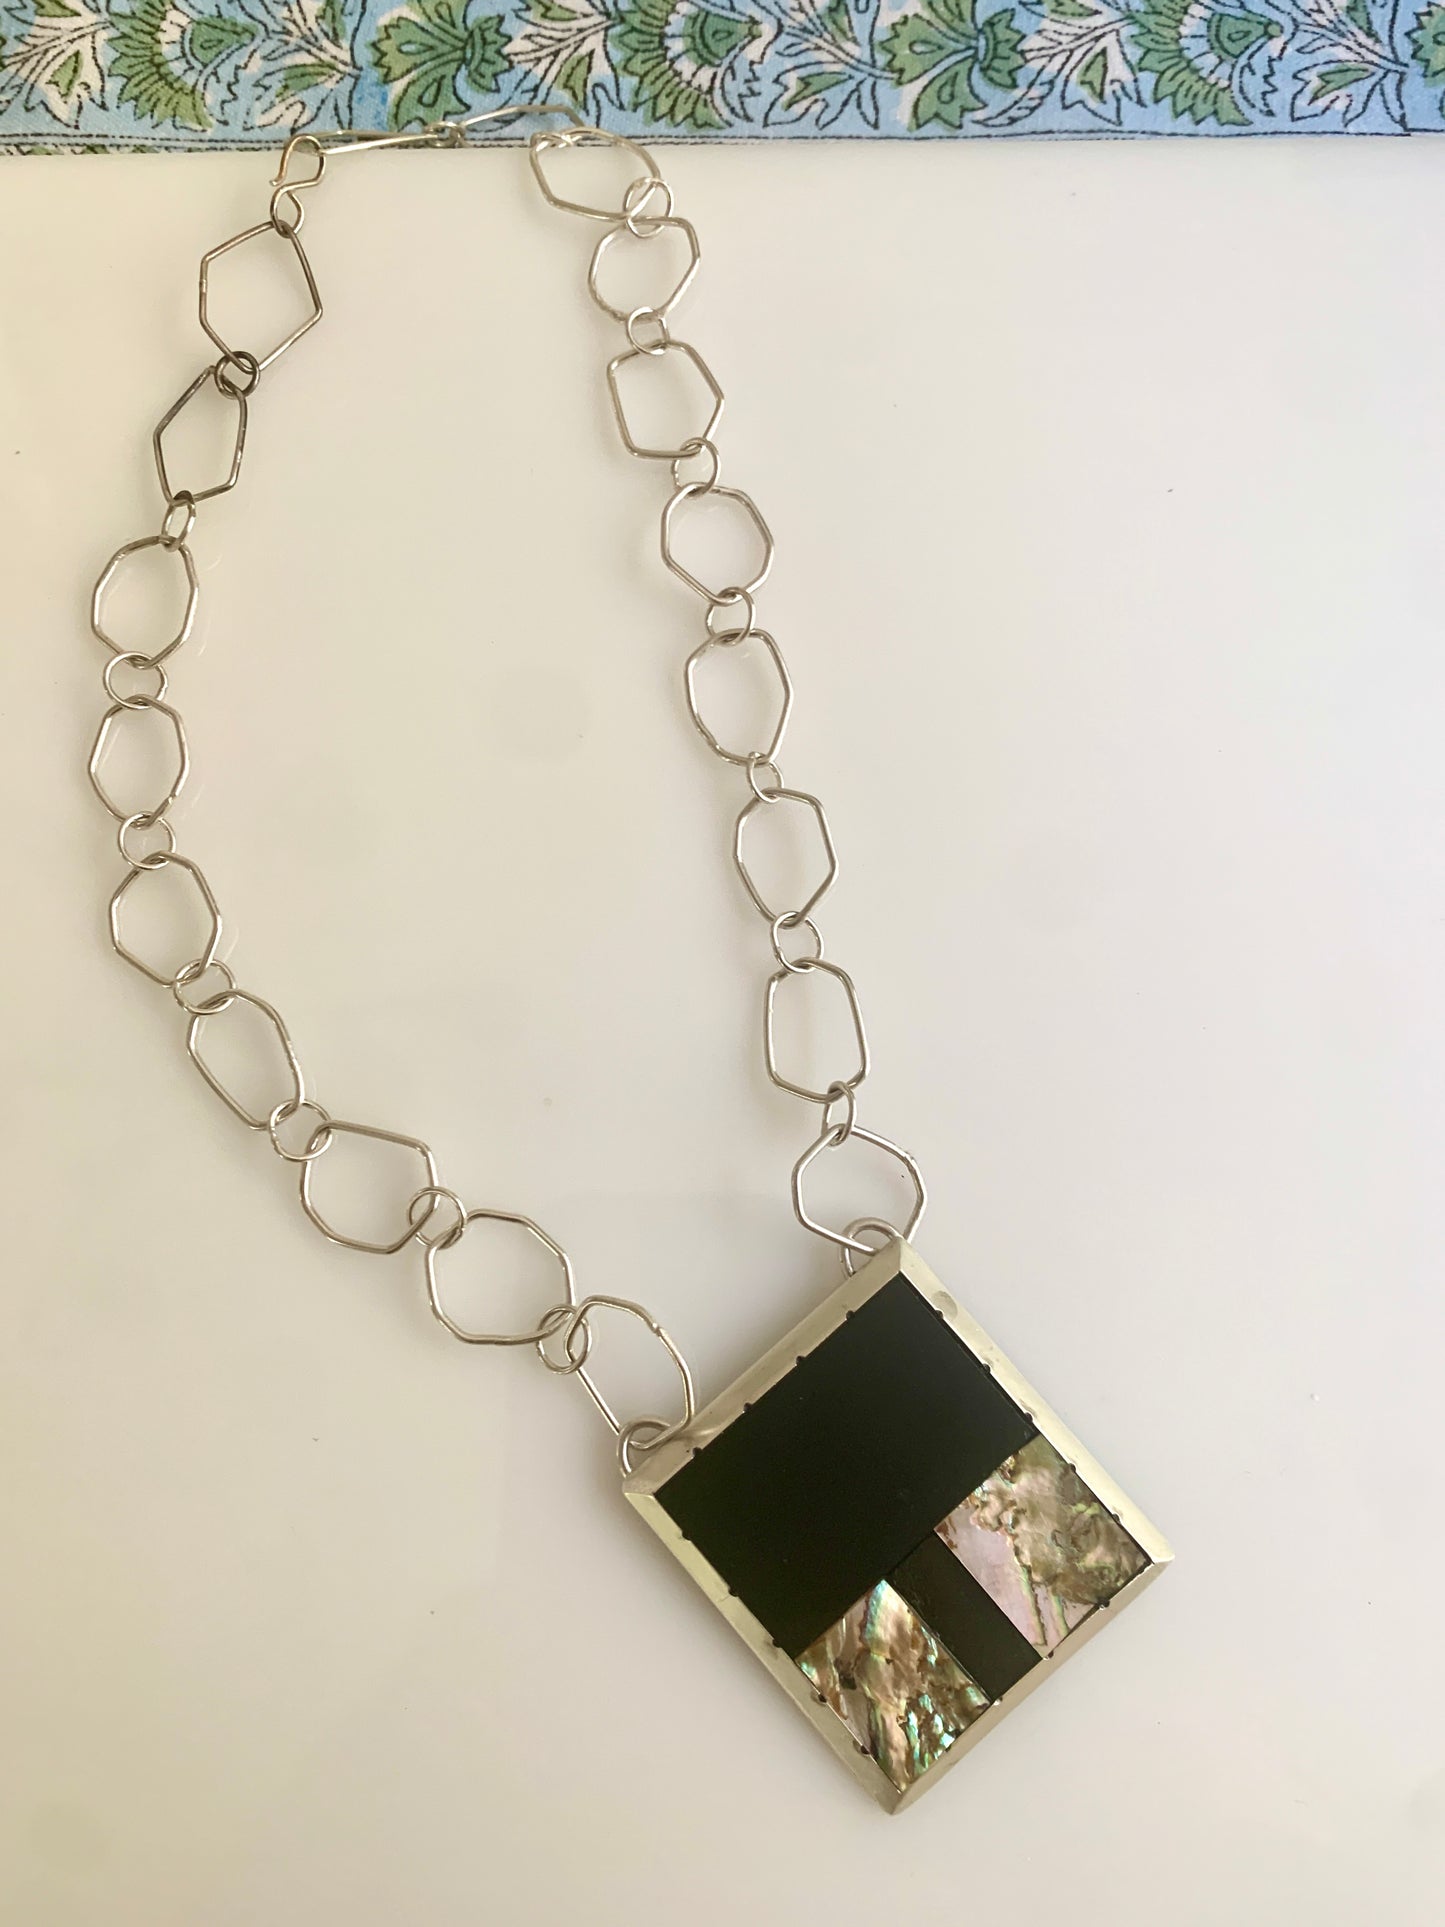 Black jet and Abalone inlay geometric statement necklace